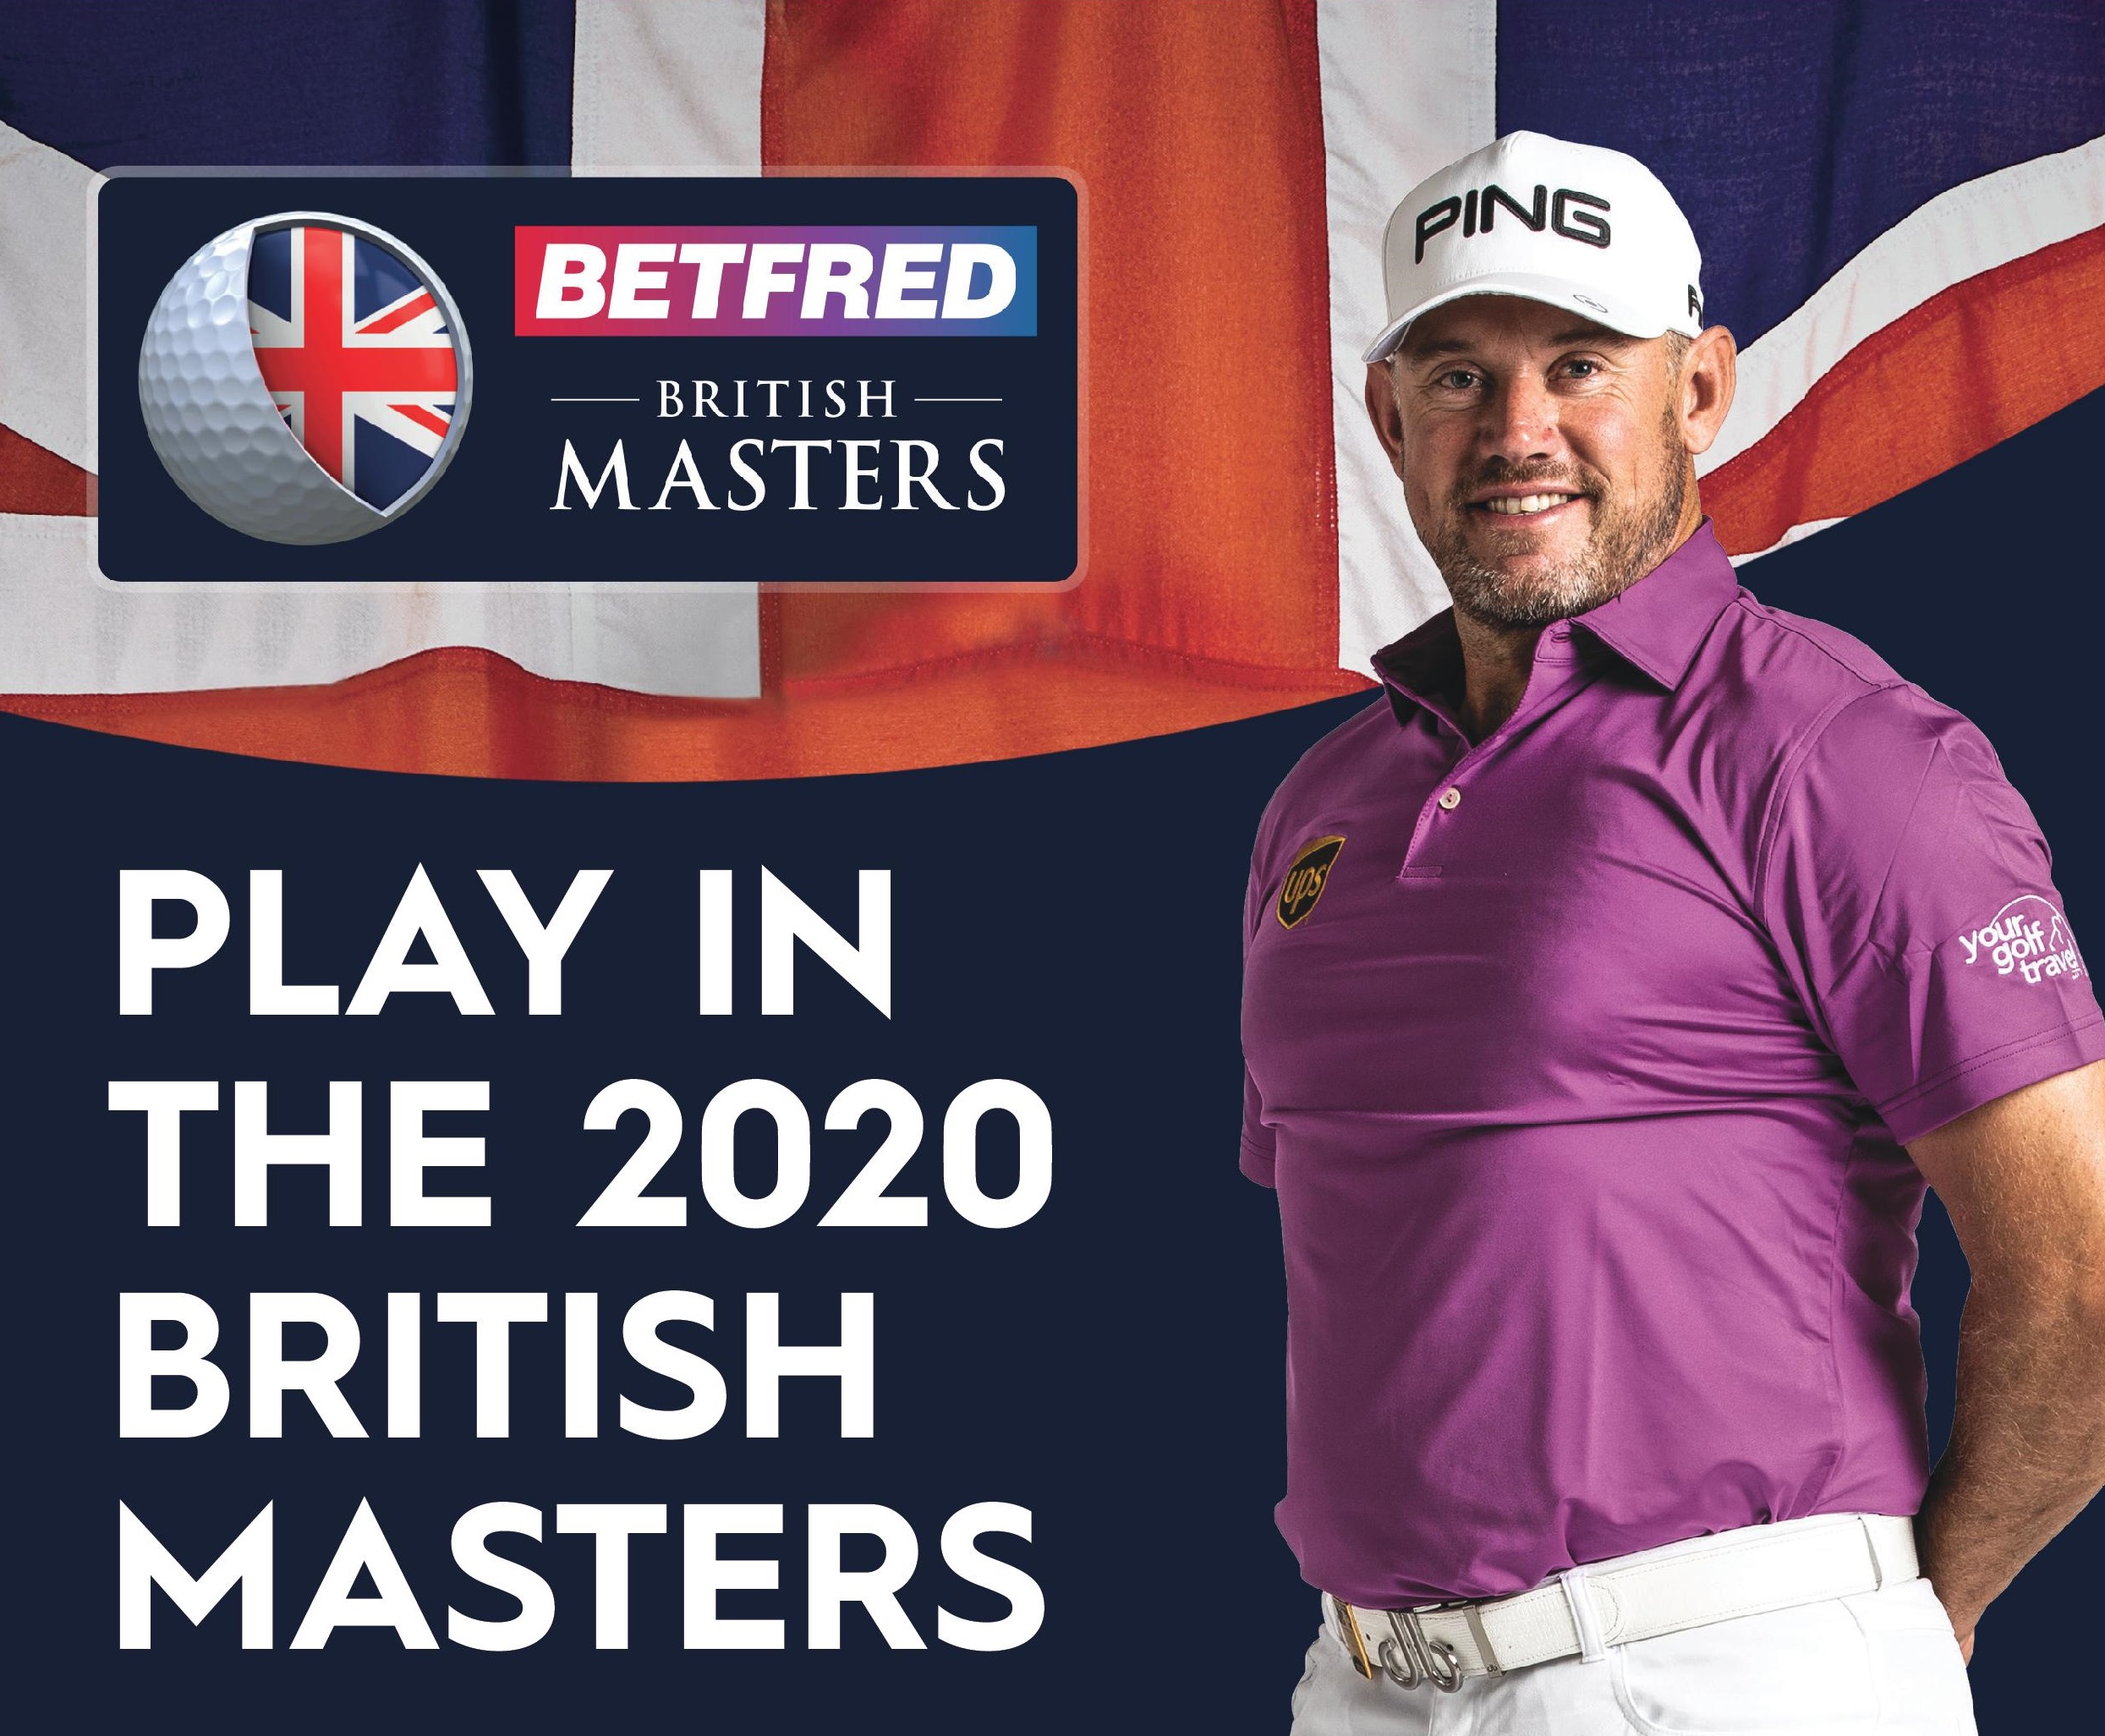 Close House is giving YOU the chance to play in the British Masters!